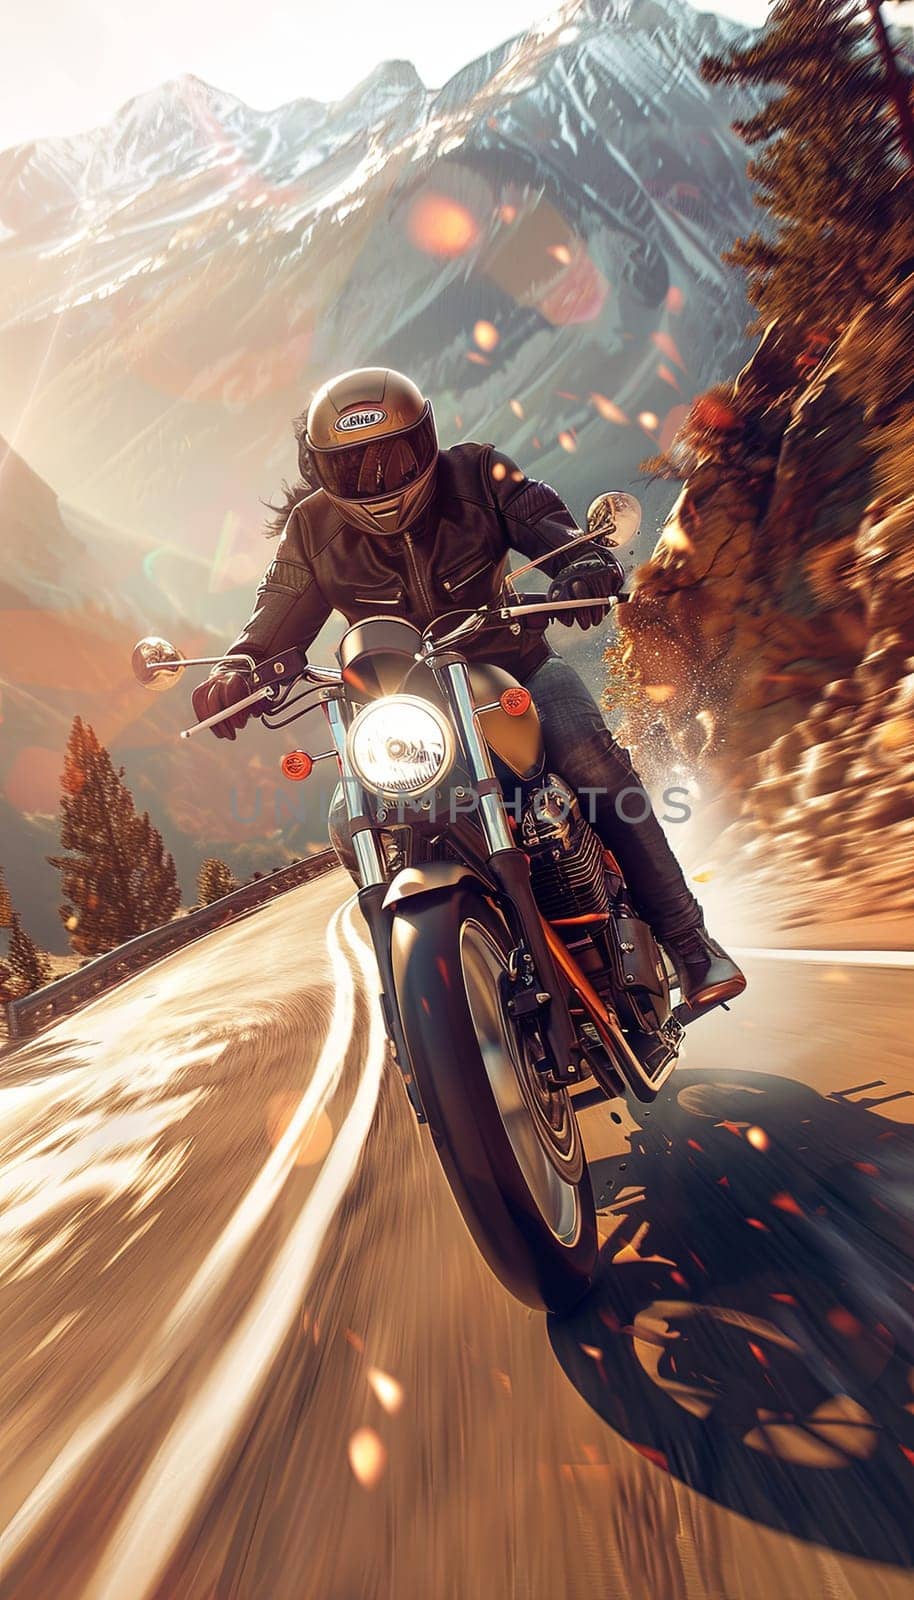 A man rides a motorcycle at high speed on a winding mountain road. The background features scenic views of mountains and forests, captured with motion blur to emphasize speed.